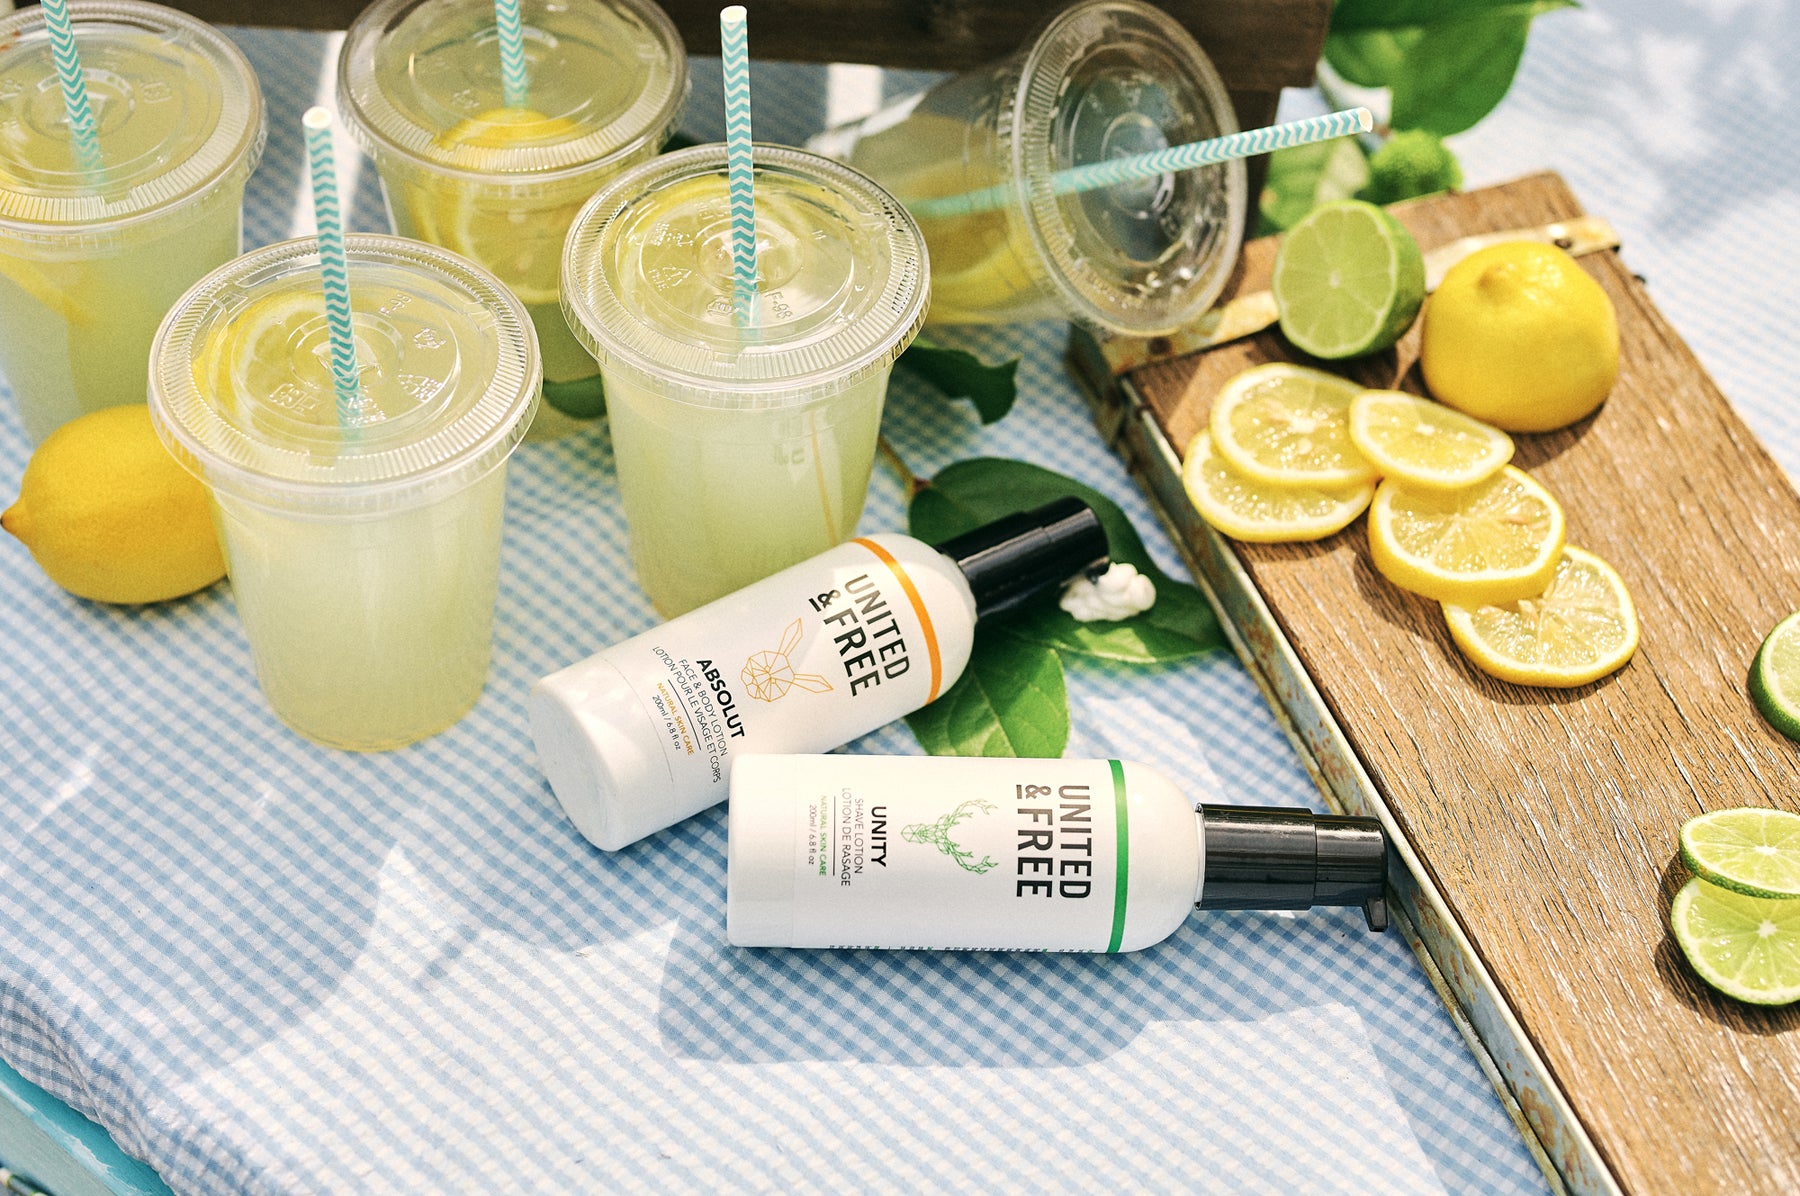 Two bottles of United & Free face and body lotion on a sunny tabletop surrounded by lemonade, lemons and limes.